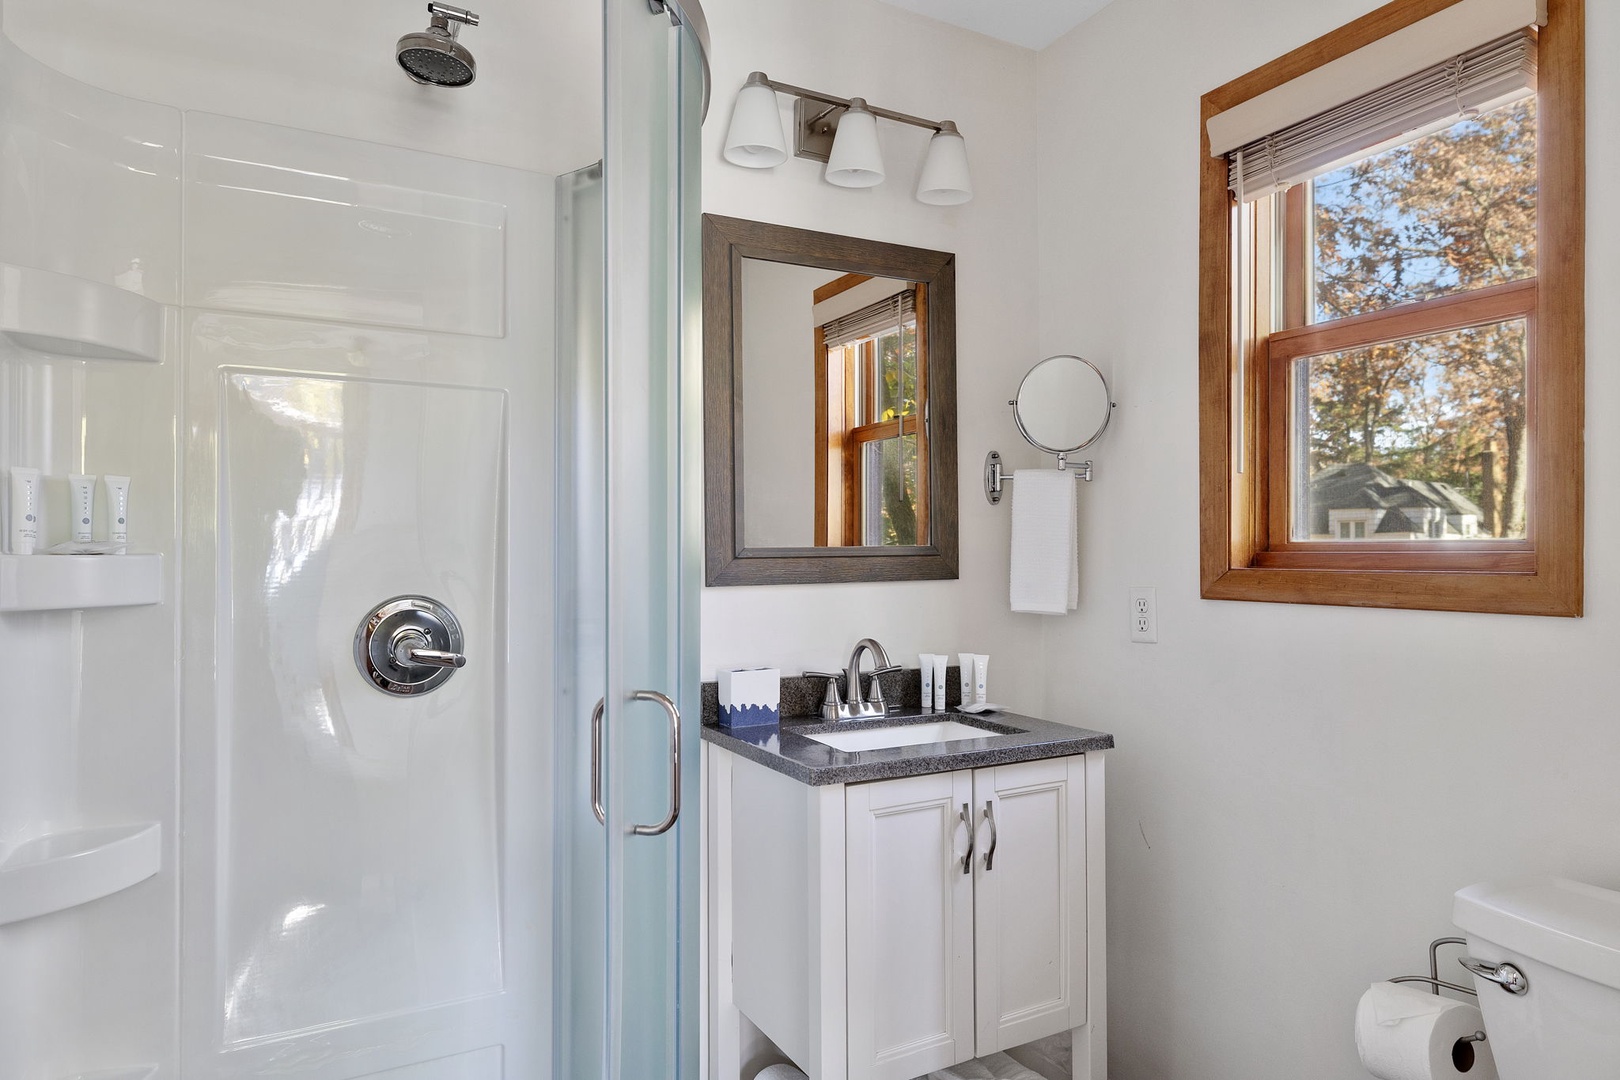 Besides the walk-in shower, a stone-top vanity always adds a touch of elegance.